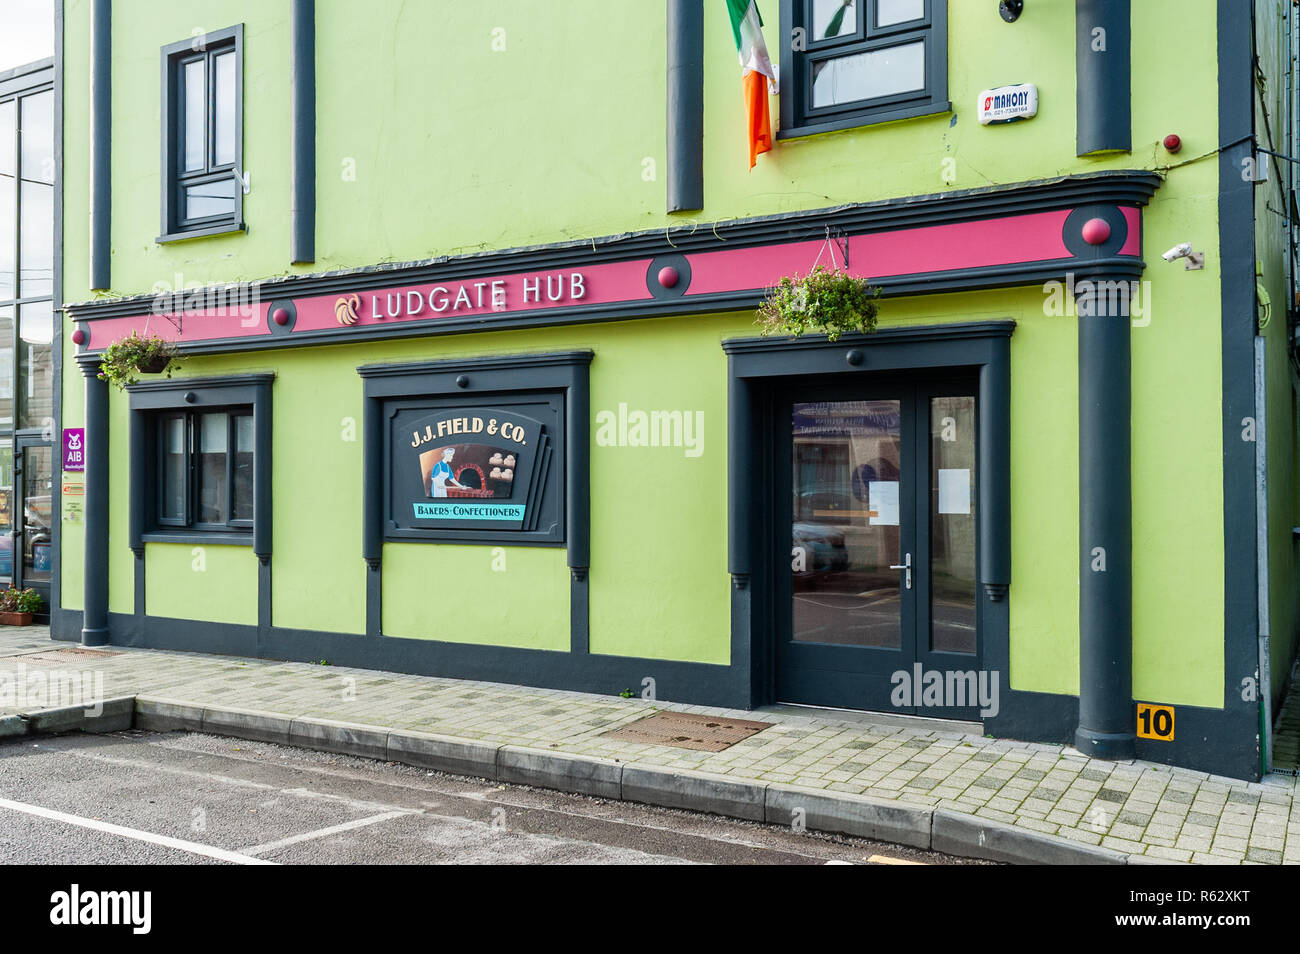 Skibbereen, West Cork, Ireland. 3rd Dec, 2018. Ludgate Hub is celebrating today as it has received €2million in funding, which will be spent on creating 390 jobs across West Cork. The Ludgte Hub is a not for profit company which provides office space and single desks for small companies and start-ups. Credit: Andy Gibson/Alamy Live News. Stock Photo